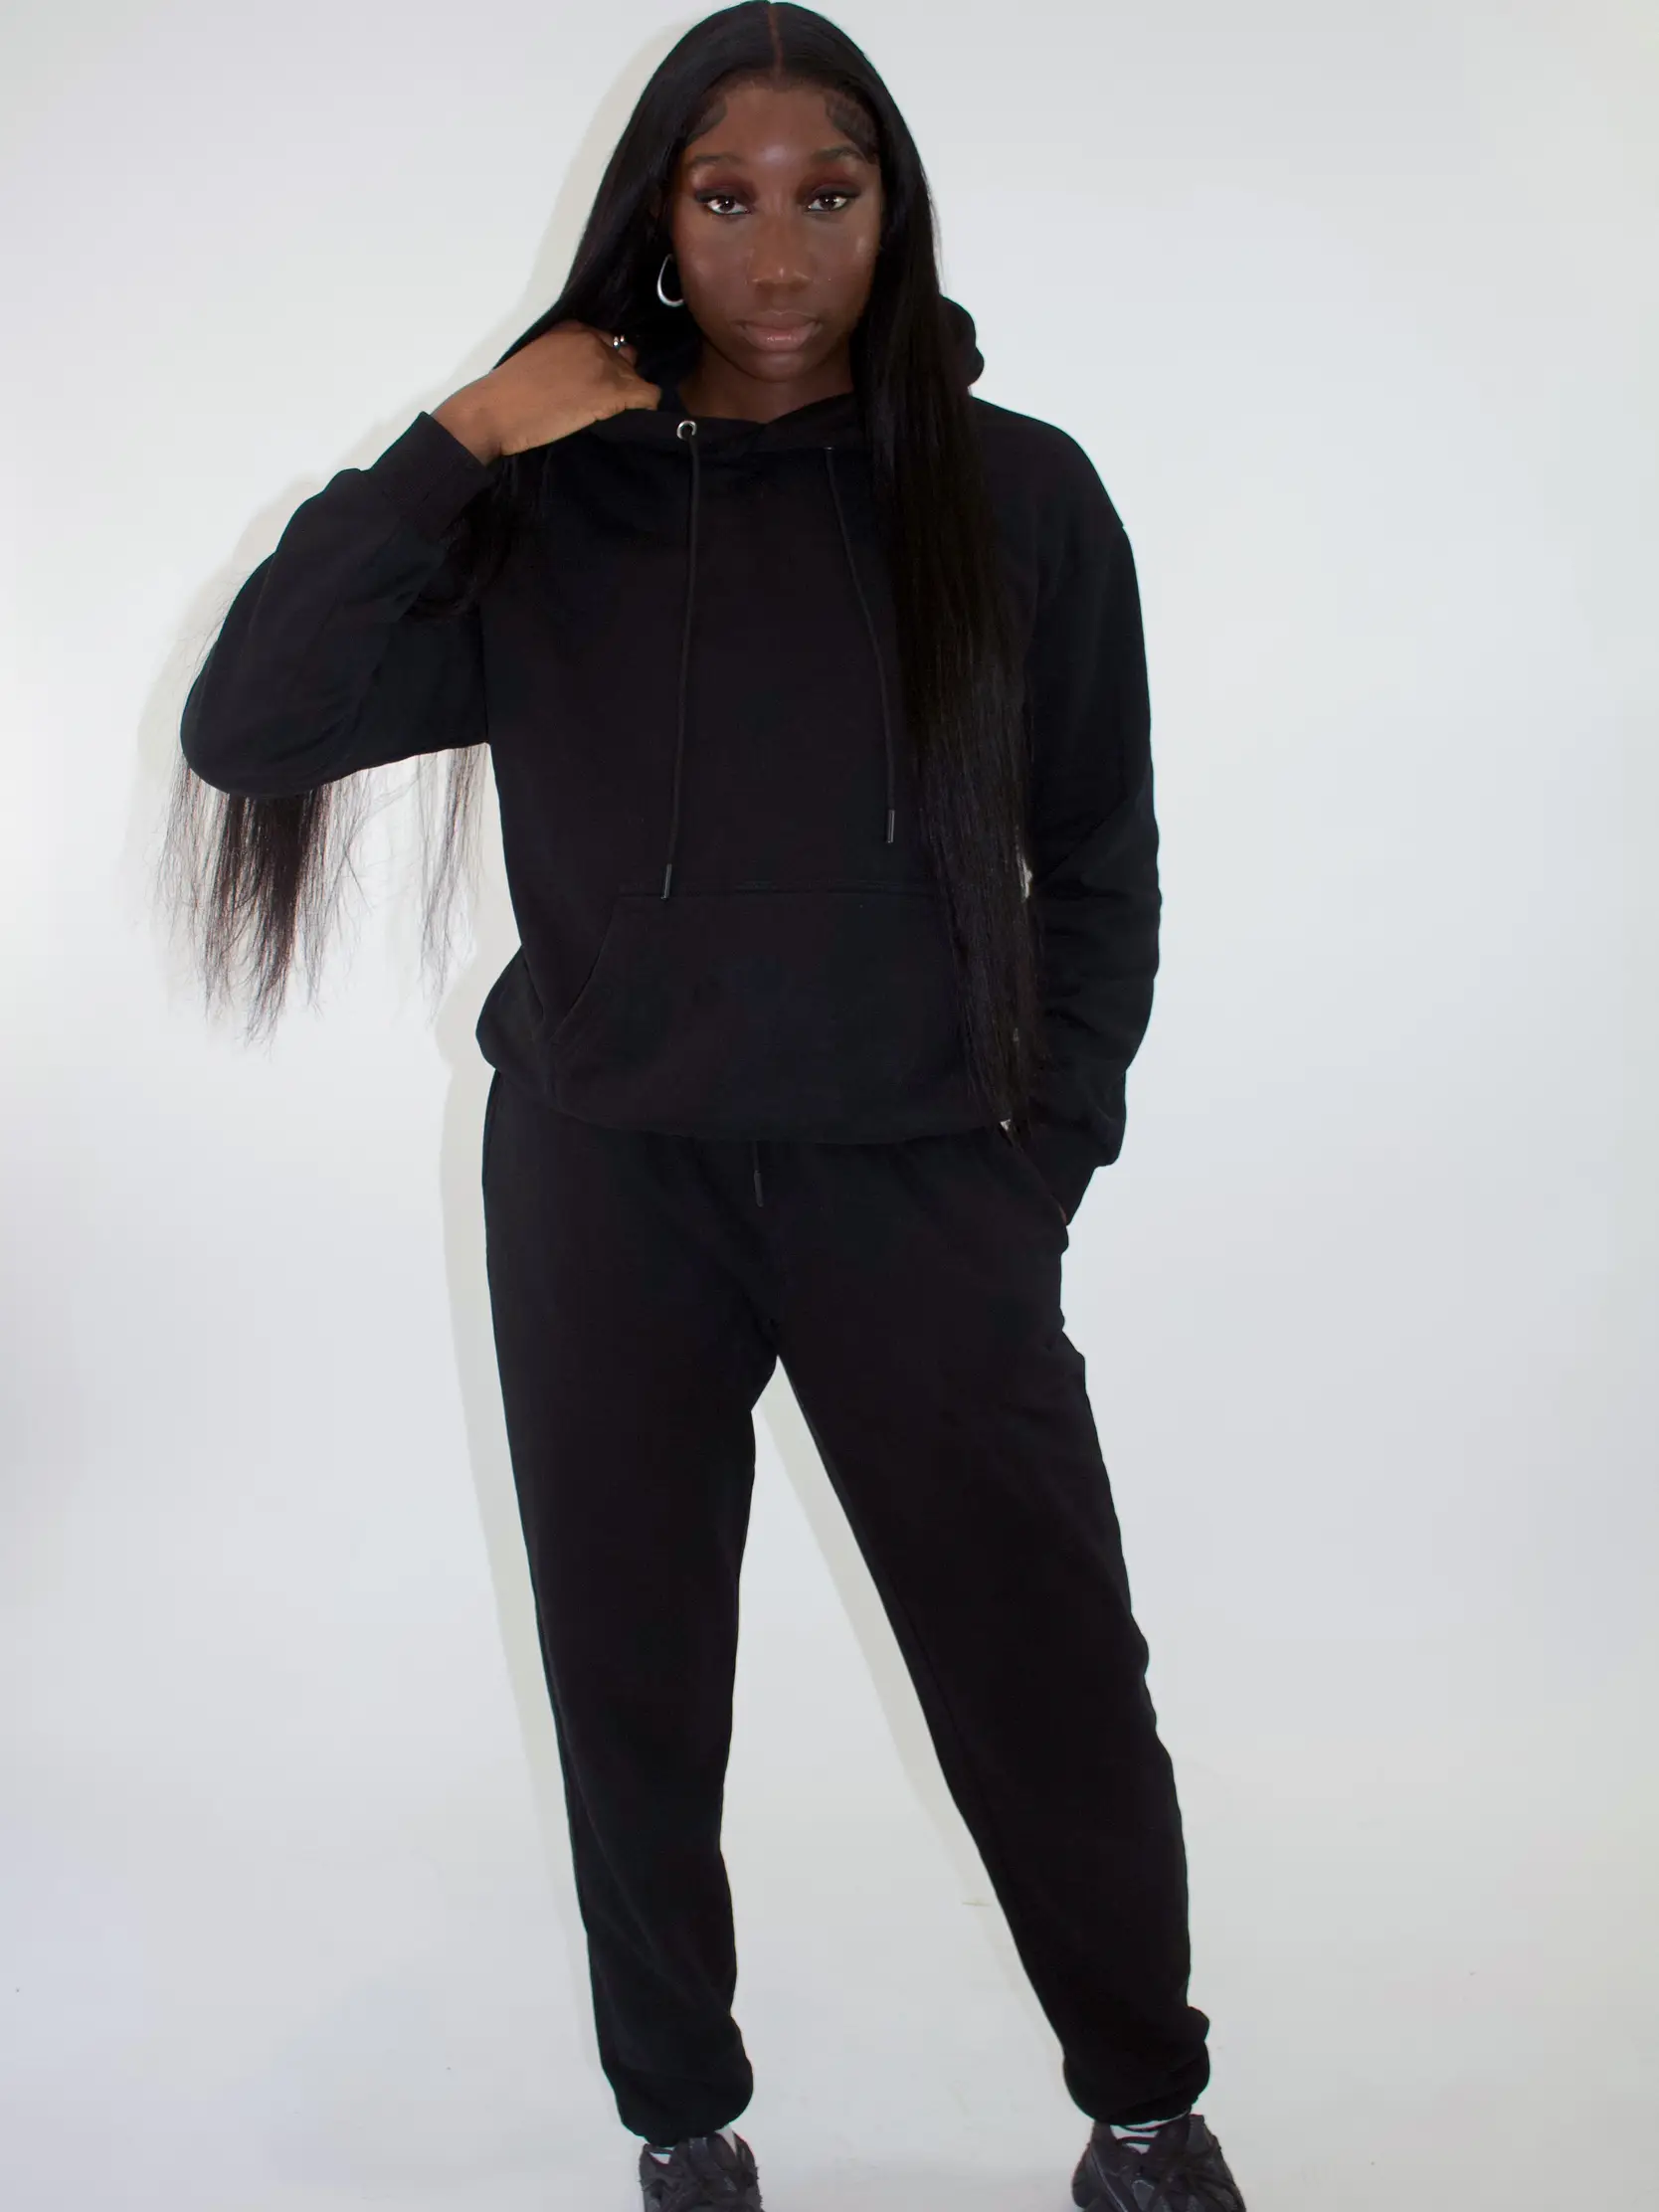 Elevate your style, literally. Tall girl tracksuits for the win. 🚀  #TallGirlStyle #StandTall”